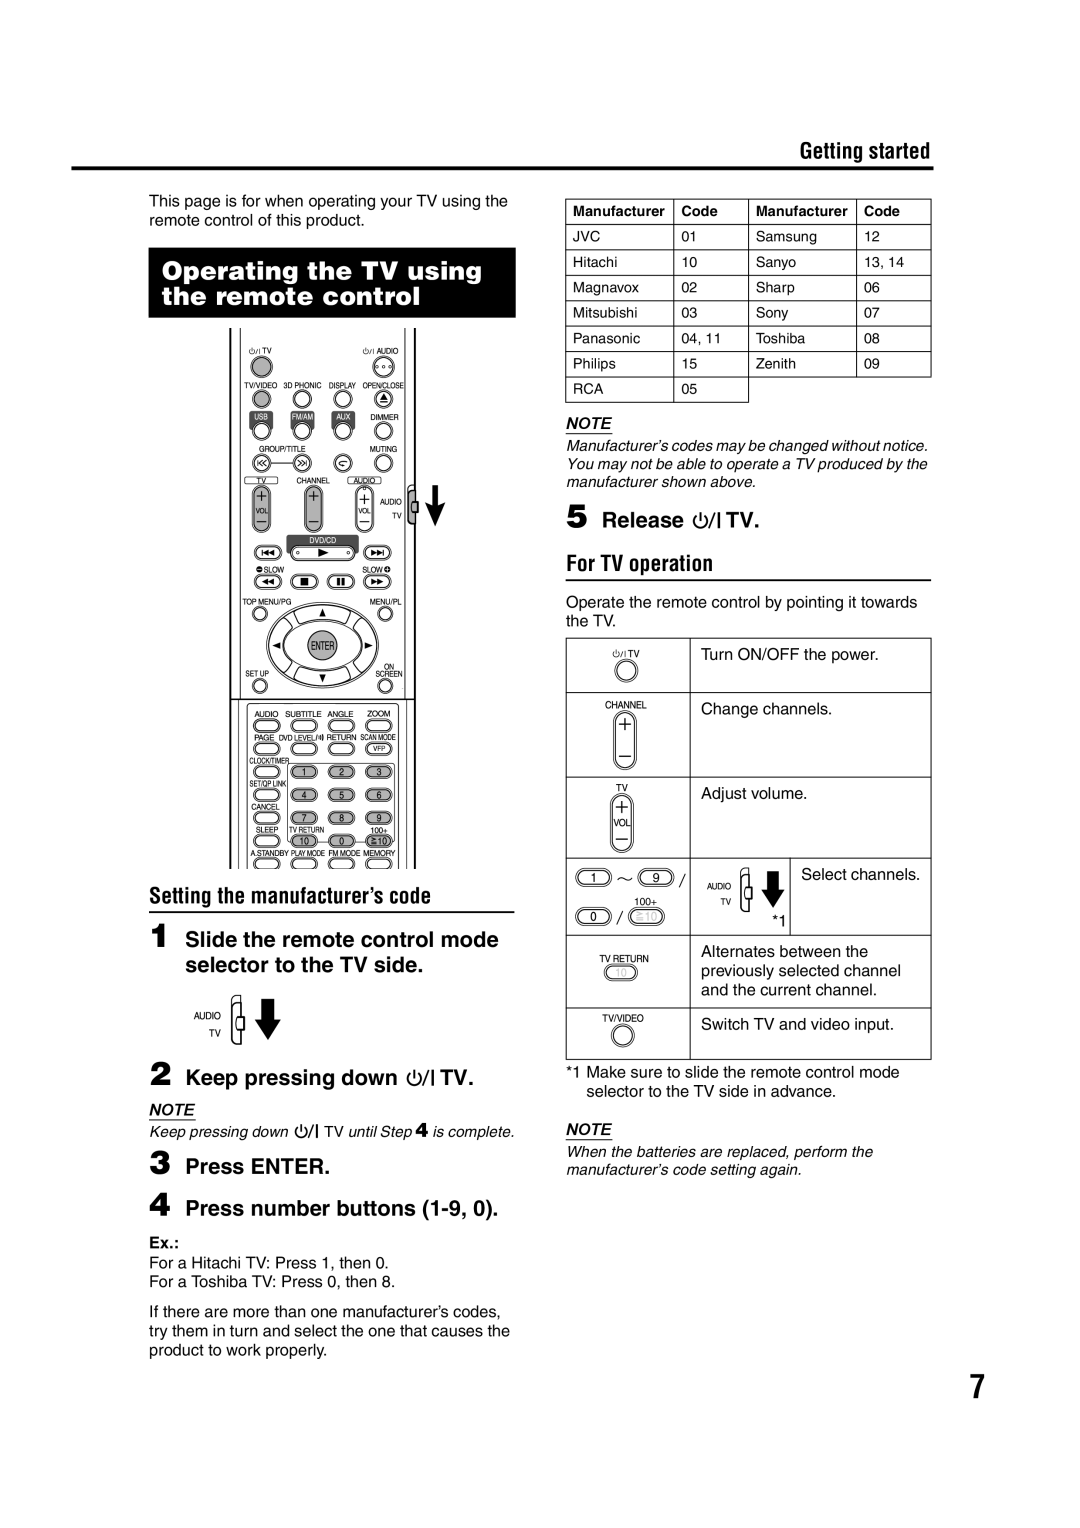 JVC EX-D11 manual Operating the TV using the remote control, Setting the manufacturer’s code, Keep pressing down TV 